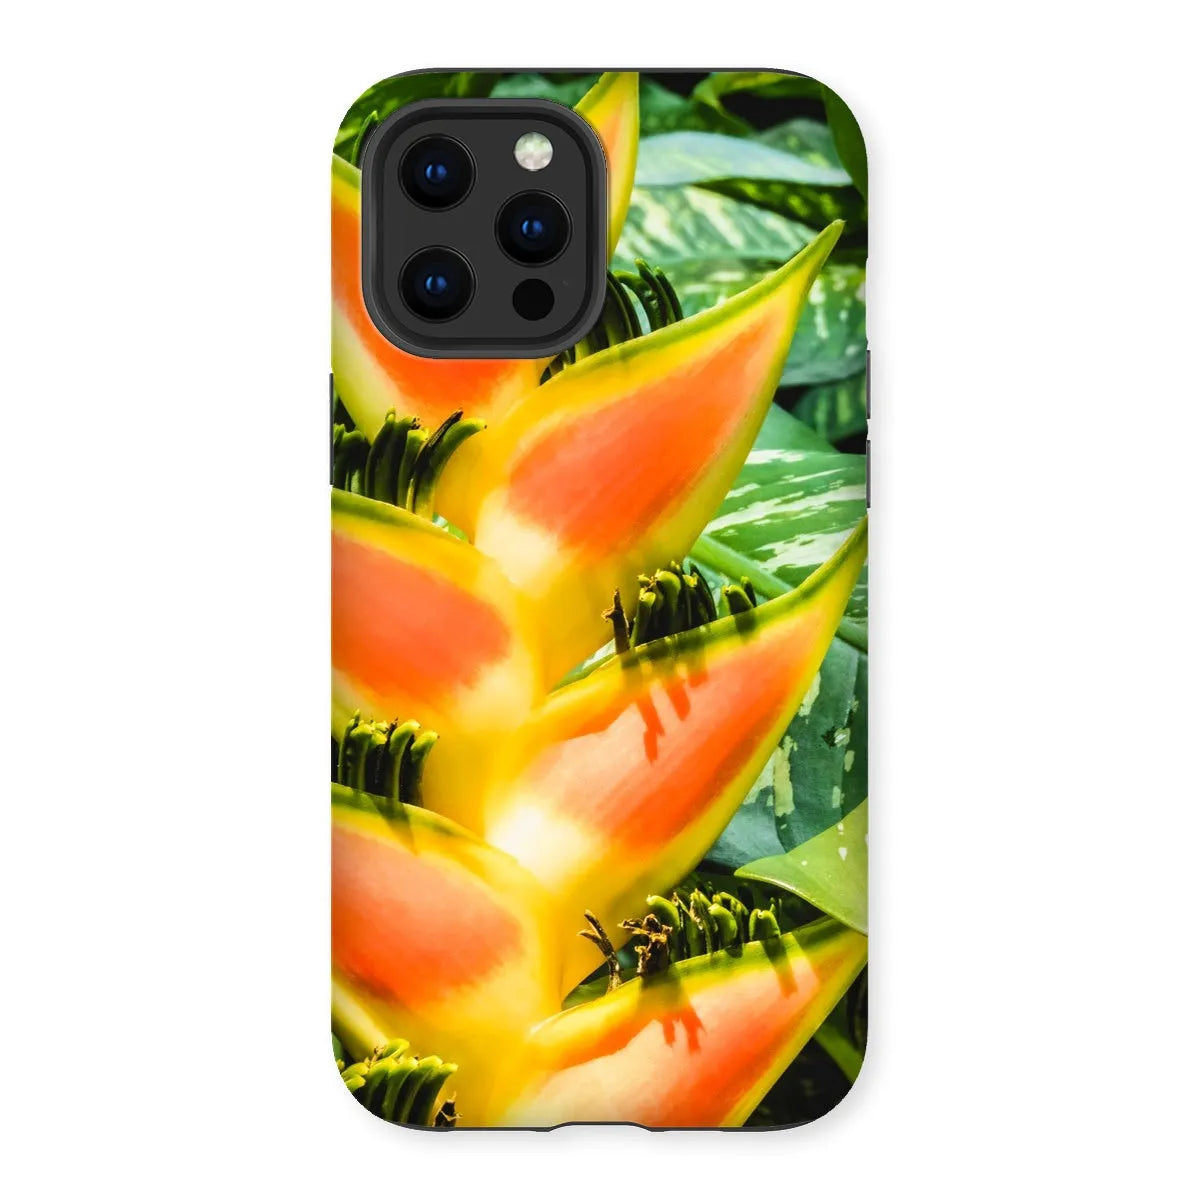 Showstopper Tough Phone Case - Iphone 12 Pro Max / Matte - Mobile Phone Cases - Aesthetic Art